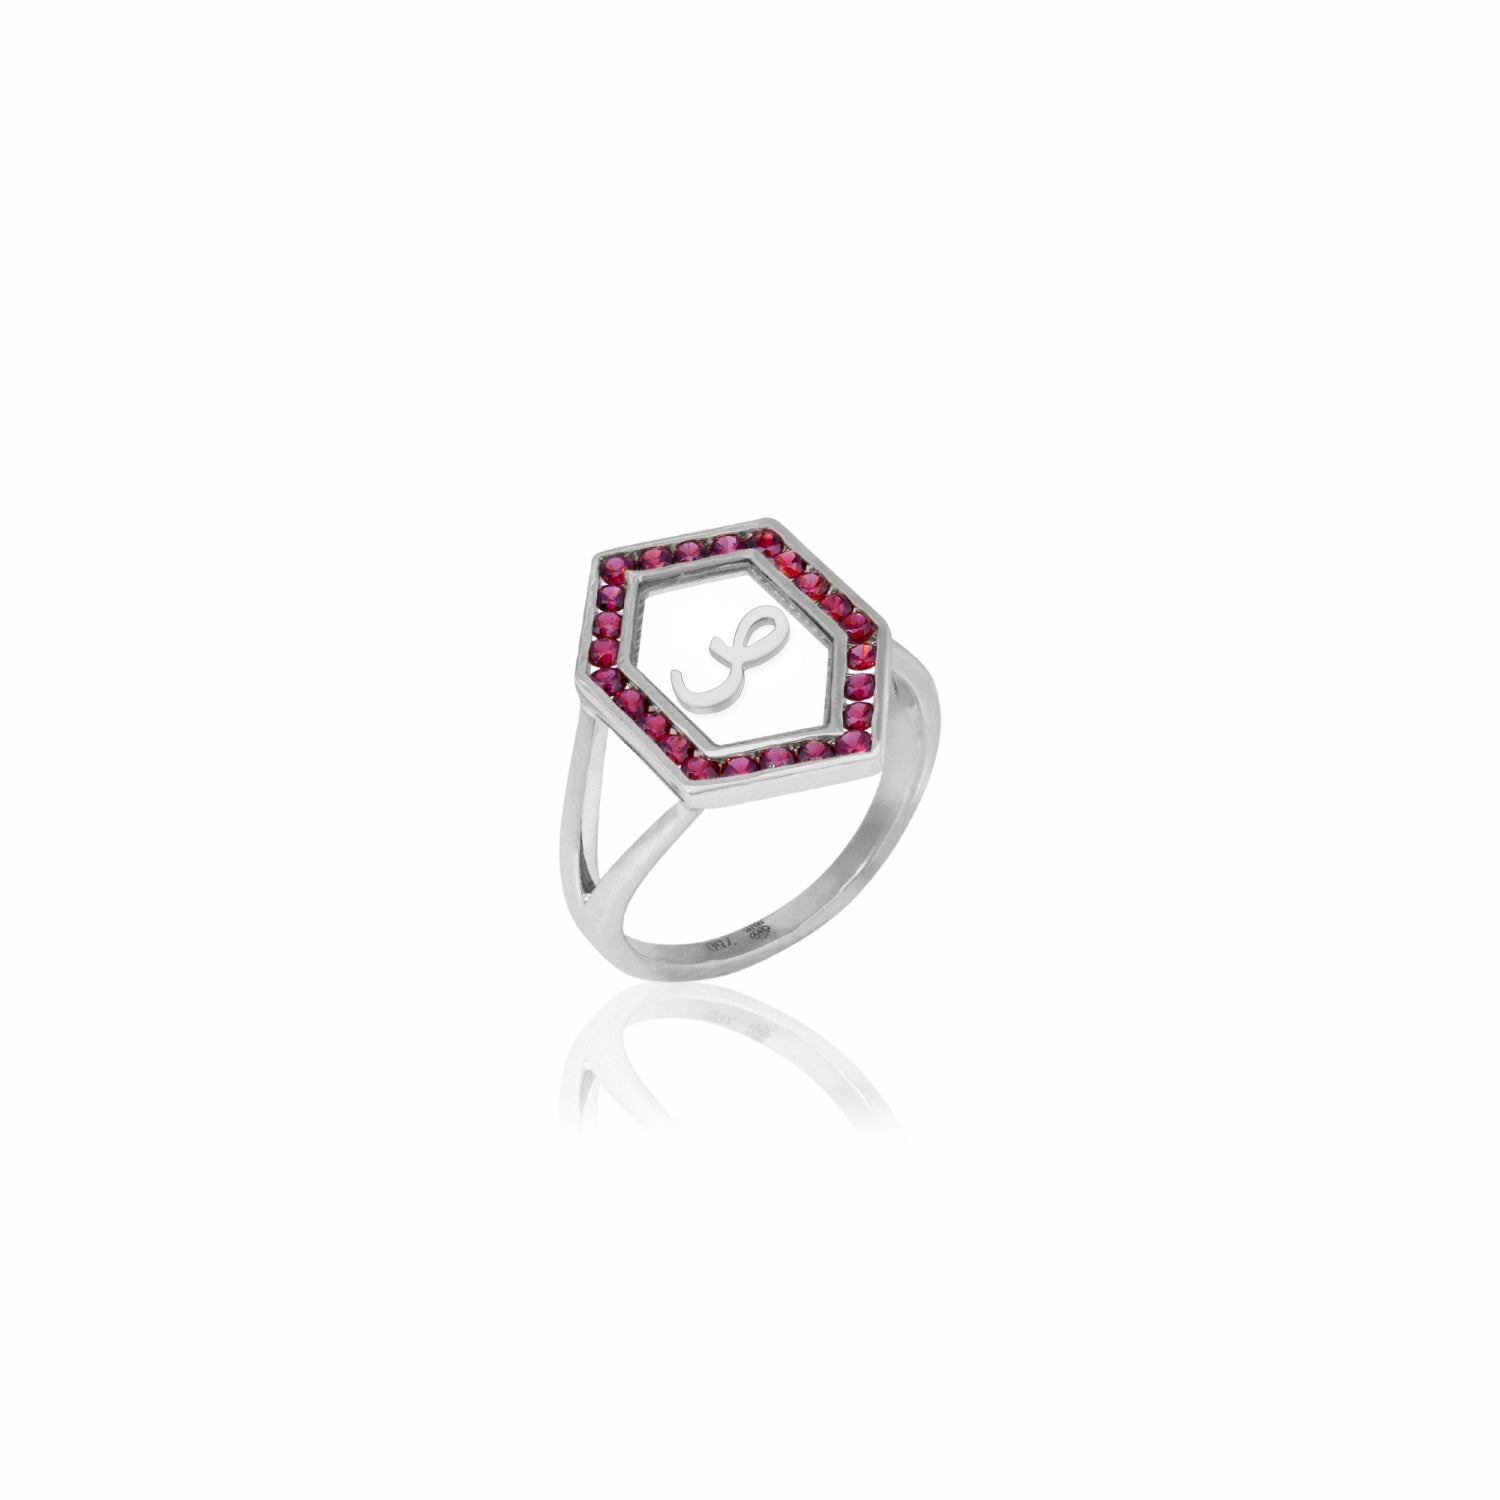 Qamoos 1.0 Letter ص Ruby Ring in White Gold